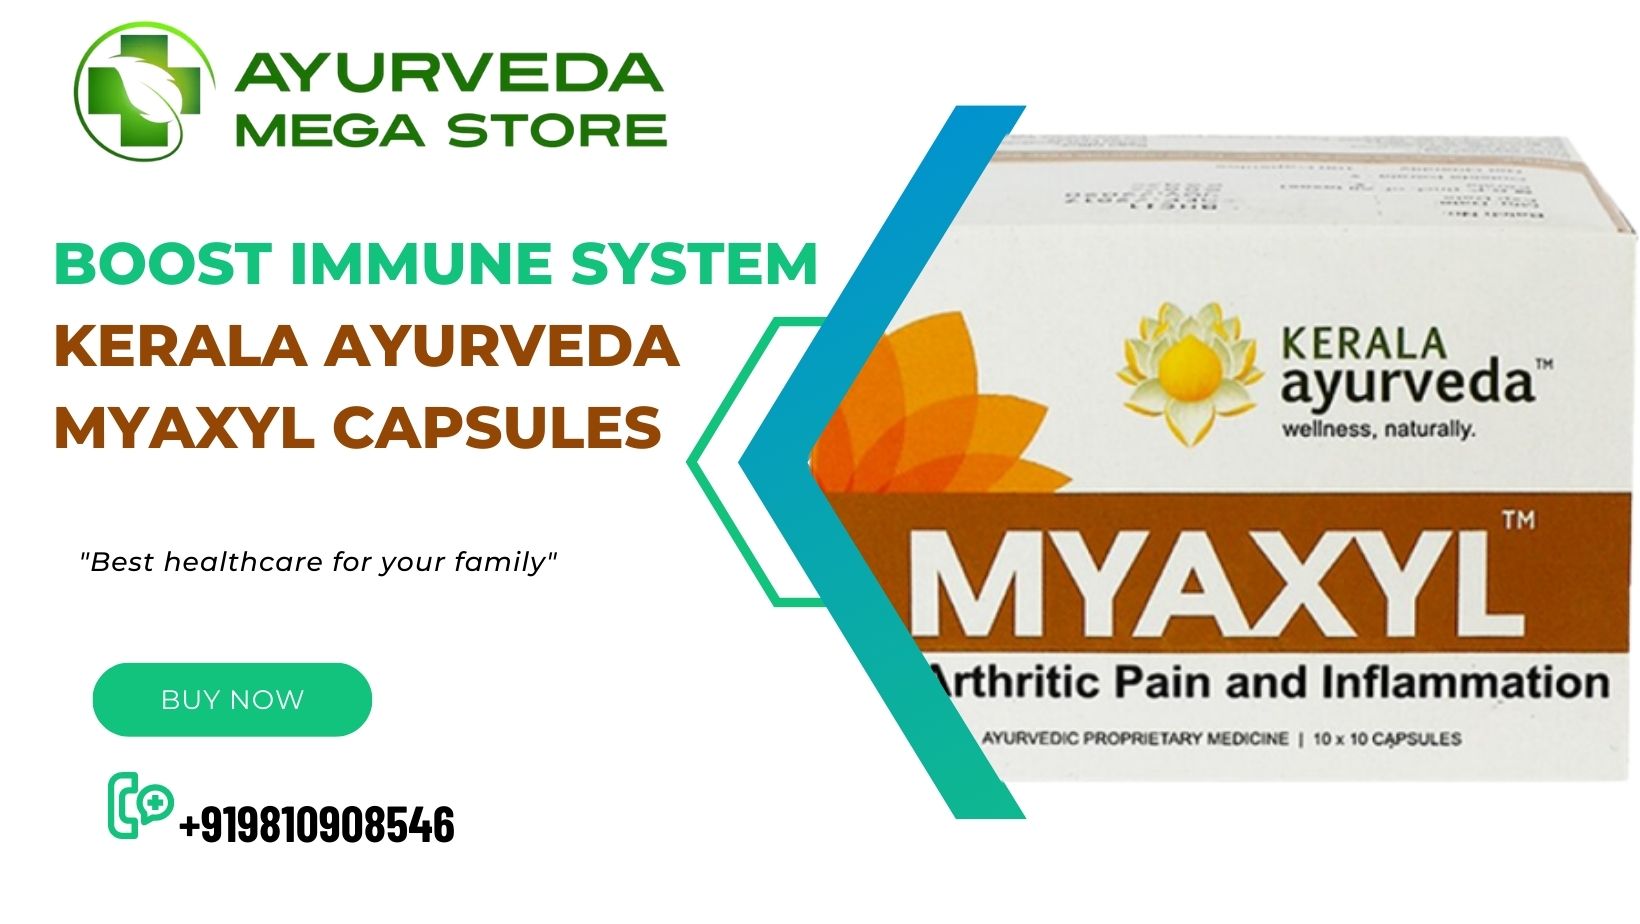 Get a Natural Boost to Your Immune System with Kerala Ayurveda Myaxyl Capsules